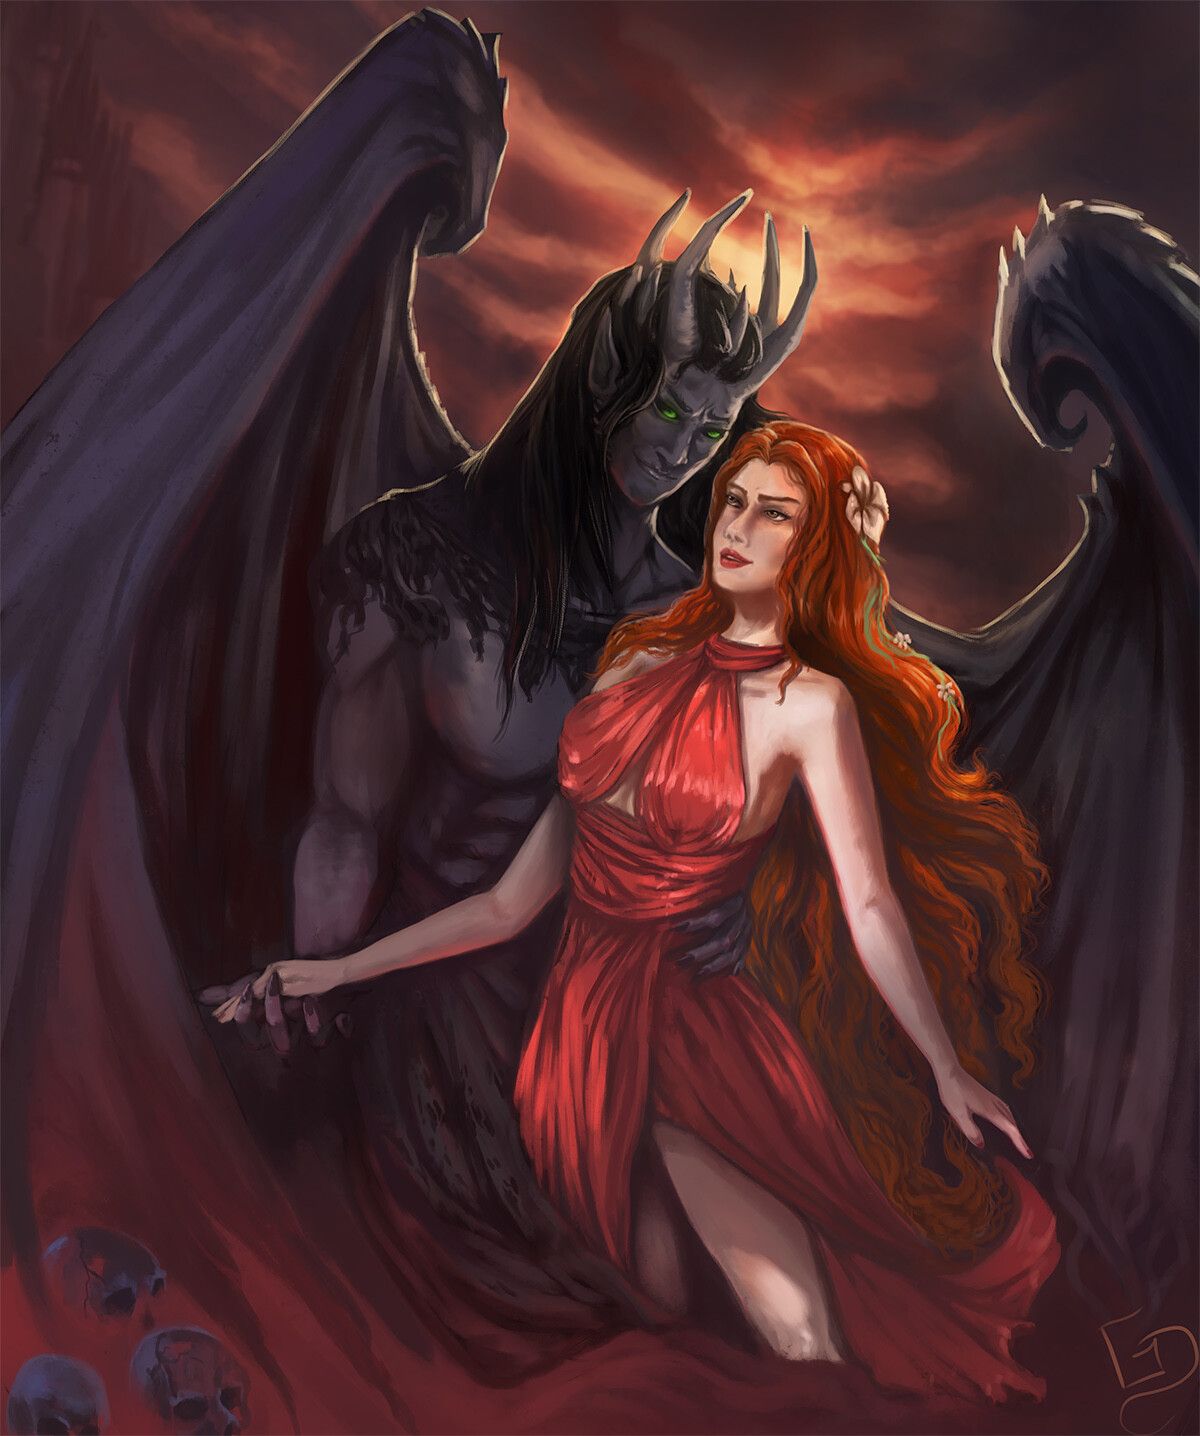 Hades And Persephone Wallpapers - Wallpaper Cave Persephone And Hades Anime